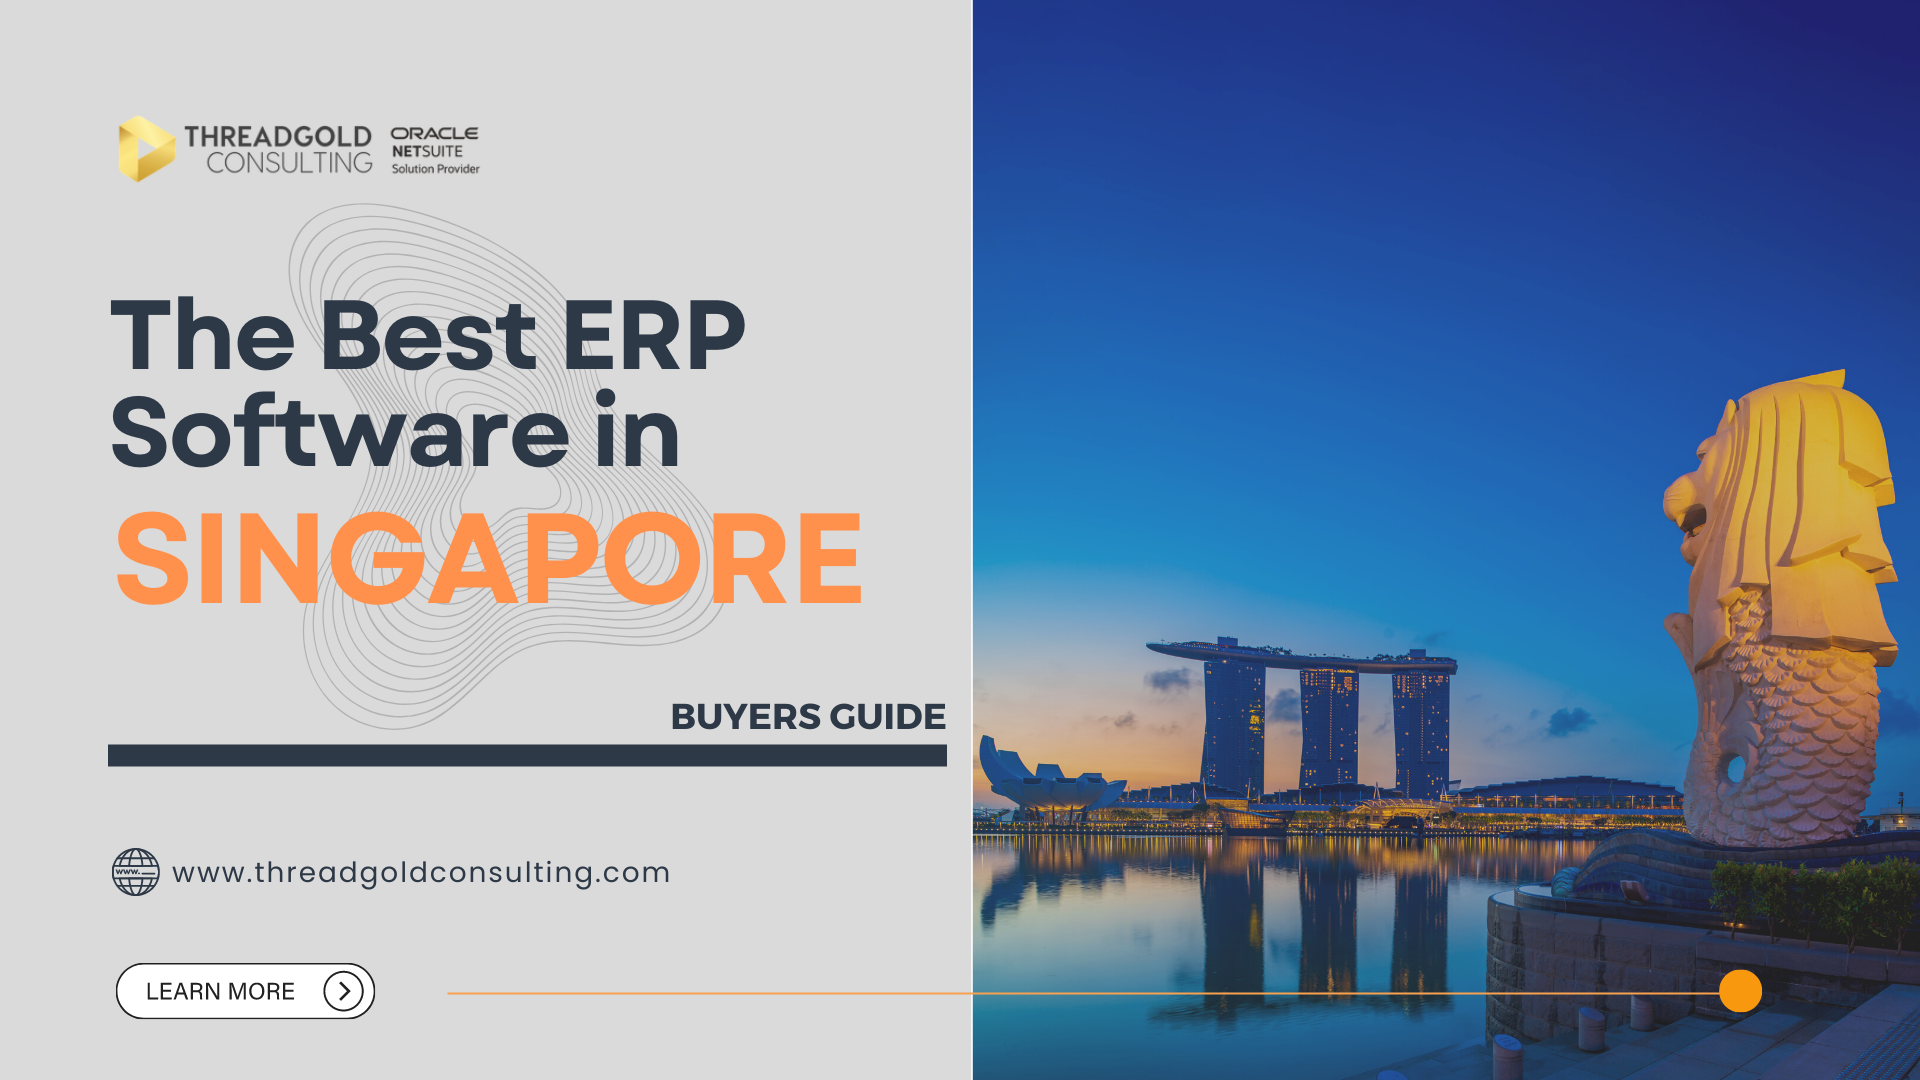 Buyers Guide: The Best ERP Software in Singapore